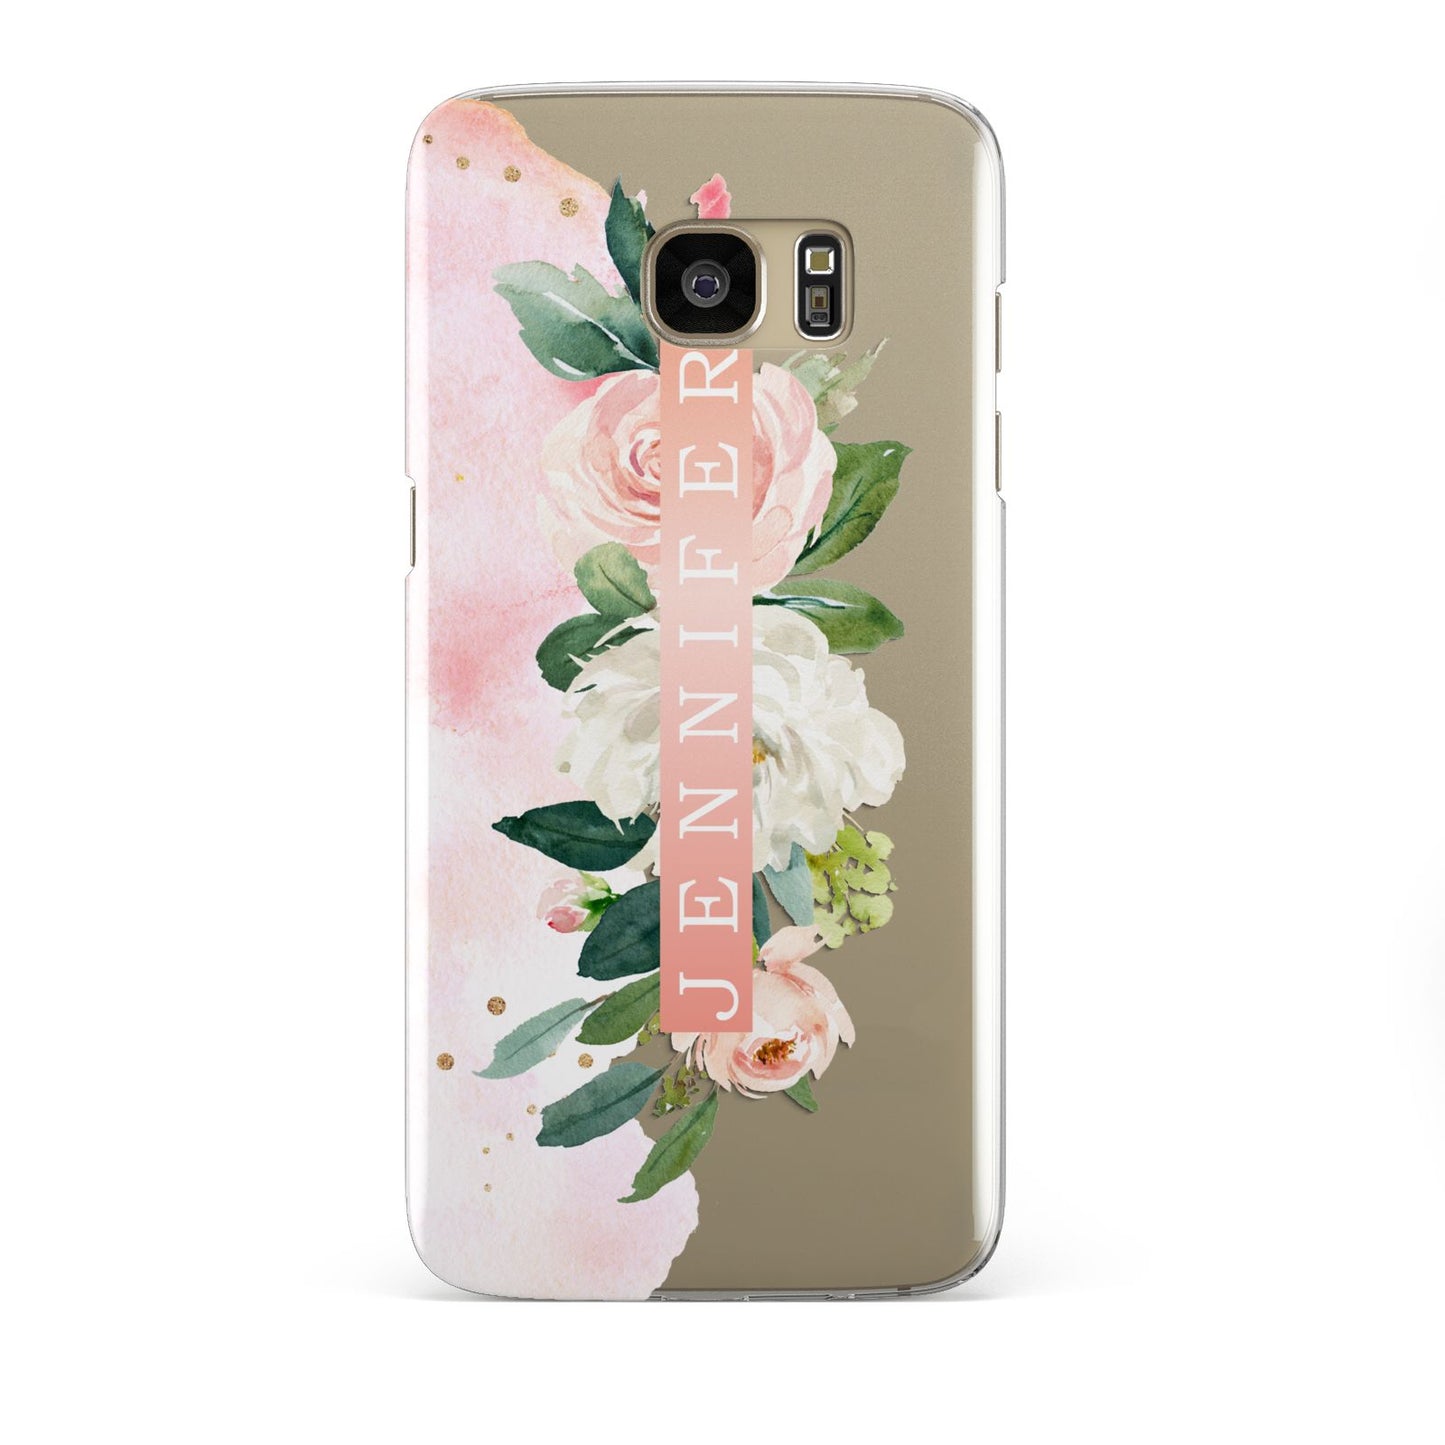 Blush Pink Personalised Name Floral Samsung Galaxy S7 Edge Case